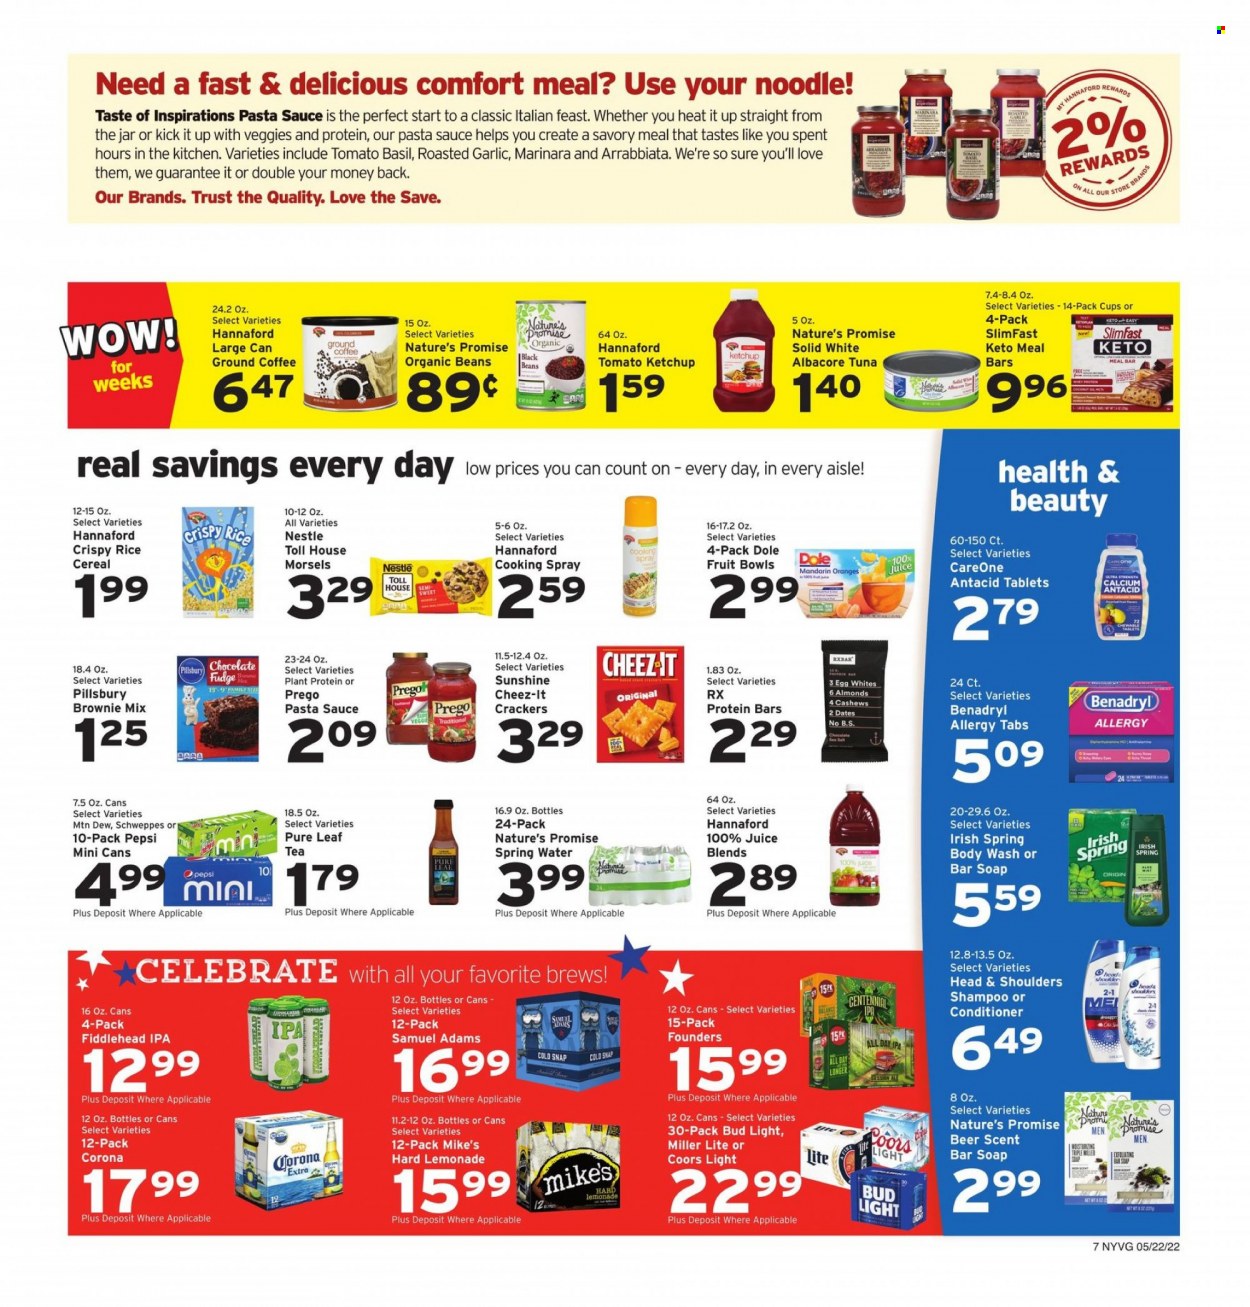 thumbnail - Hannaford Flyer - 05/22/2022 - 05/28/2022 - Sales products - Nature’s Promise, brownie mix, Dole, mandarines, oranges, tuna, pasta sauce, Pillsbury, noodles, Slimfast, eggs, Sunshine, fudge, Nestlé, chocolate, crackers, Cheez-It, plant protein, black beans, cereals, protein bar, esponja, ketchup, cooking spray, lemonade, Mountain Dew, Schweppes, Pepsi, juice, spring water, tea, Pure Leaf, coffee, ground coffee, beer, Bud Light, Corona Extra, IPA, body wash, shampoo, soap bar, soap, conditioner, Head & Shoulders, Sure, cup, jar, calcium, Antacid, Miller Lite, Coors. Page 9.